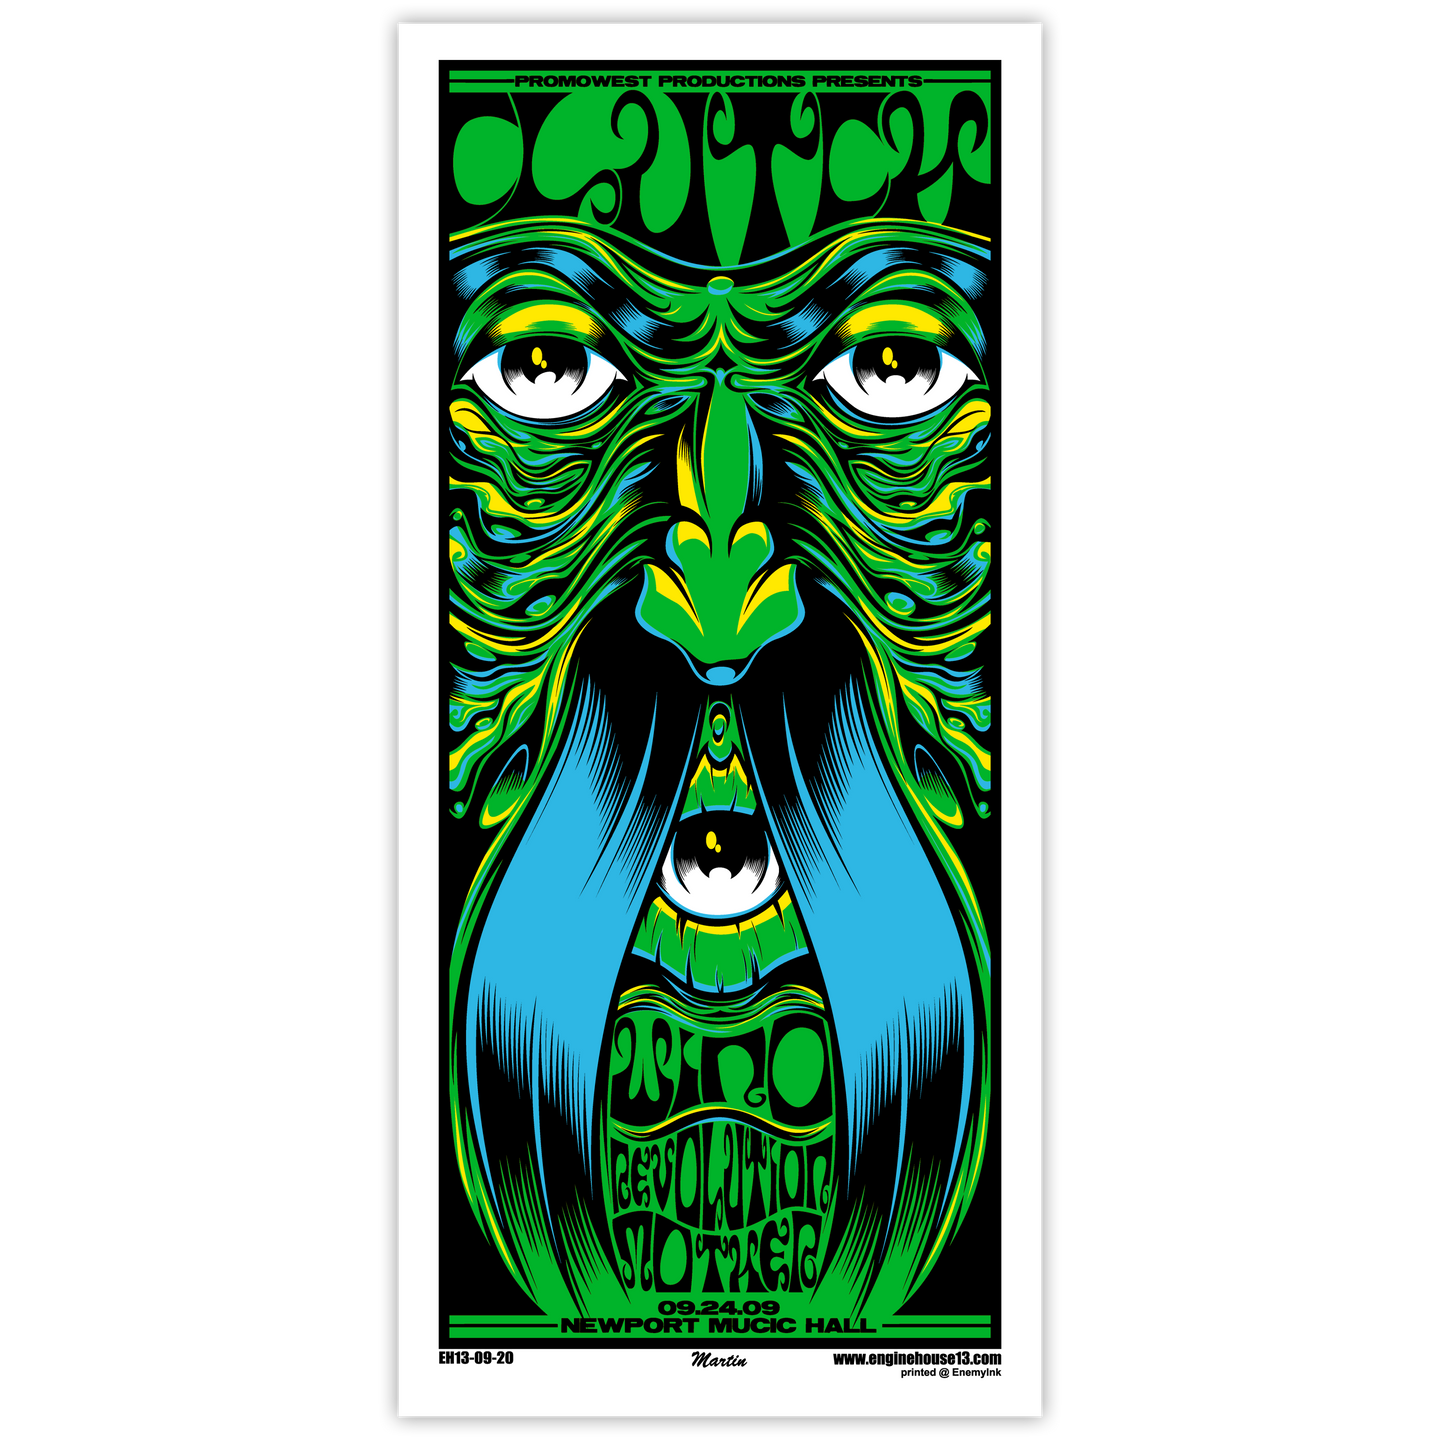 Clutch - 9.24.09  Poster